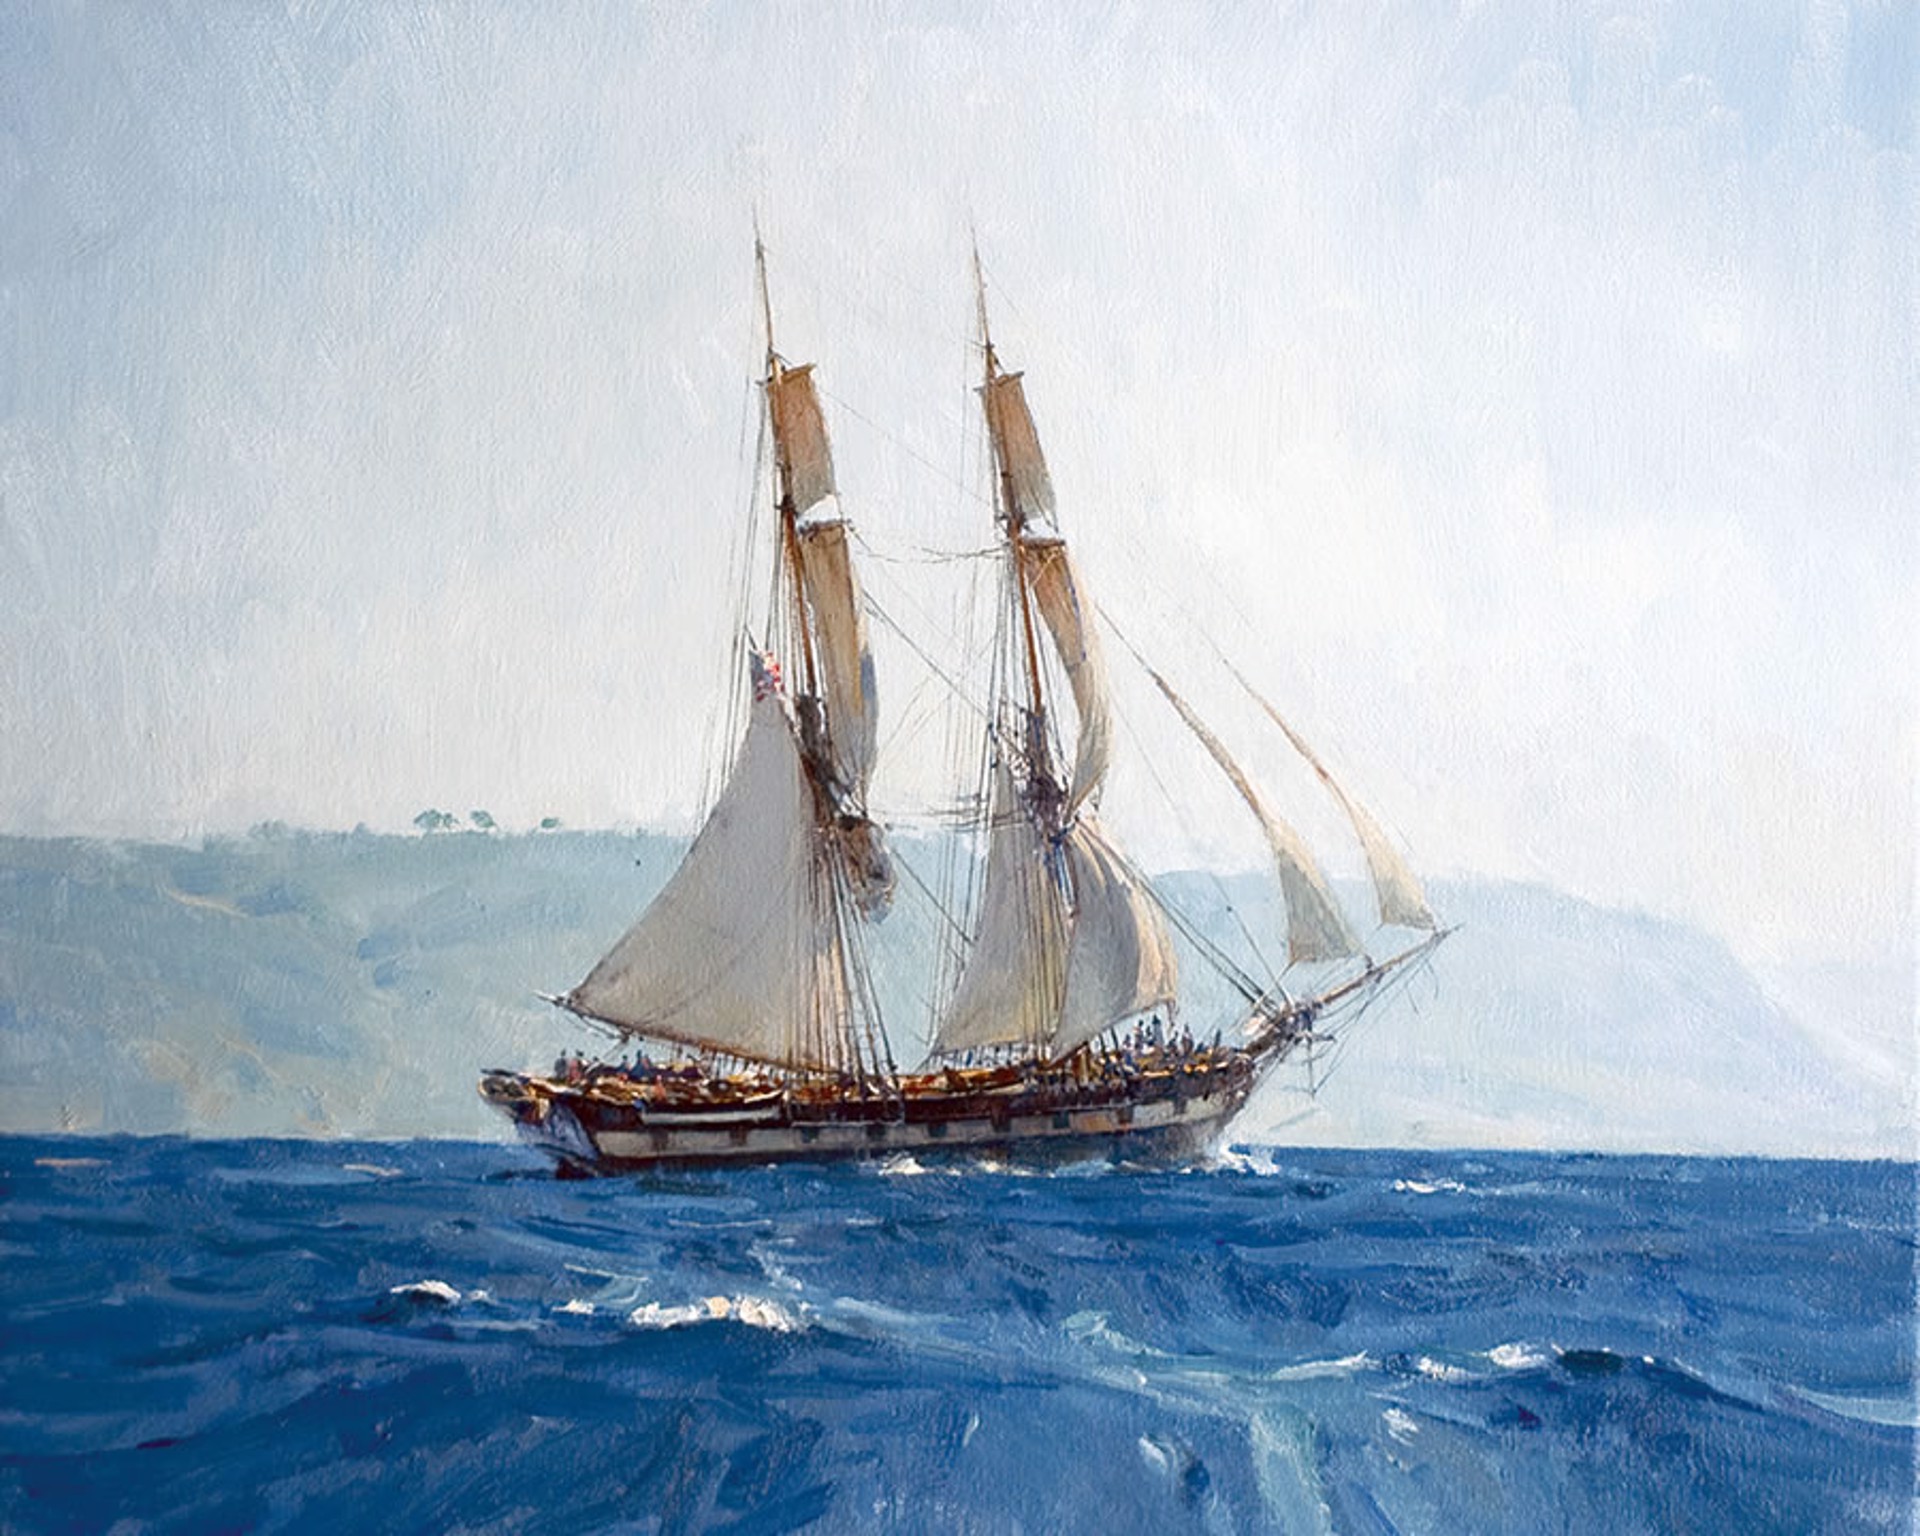 Brig ‘Pilgrim’ Approaching San Diego, March 1835 by Christopher Blossom